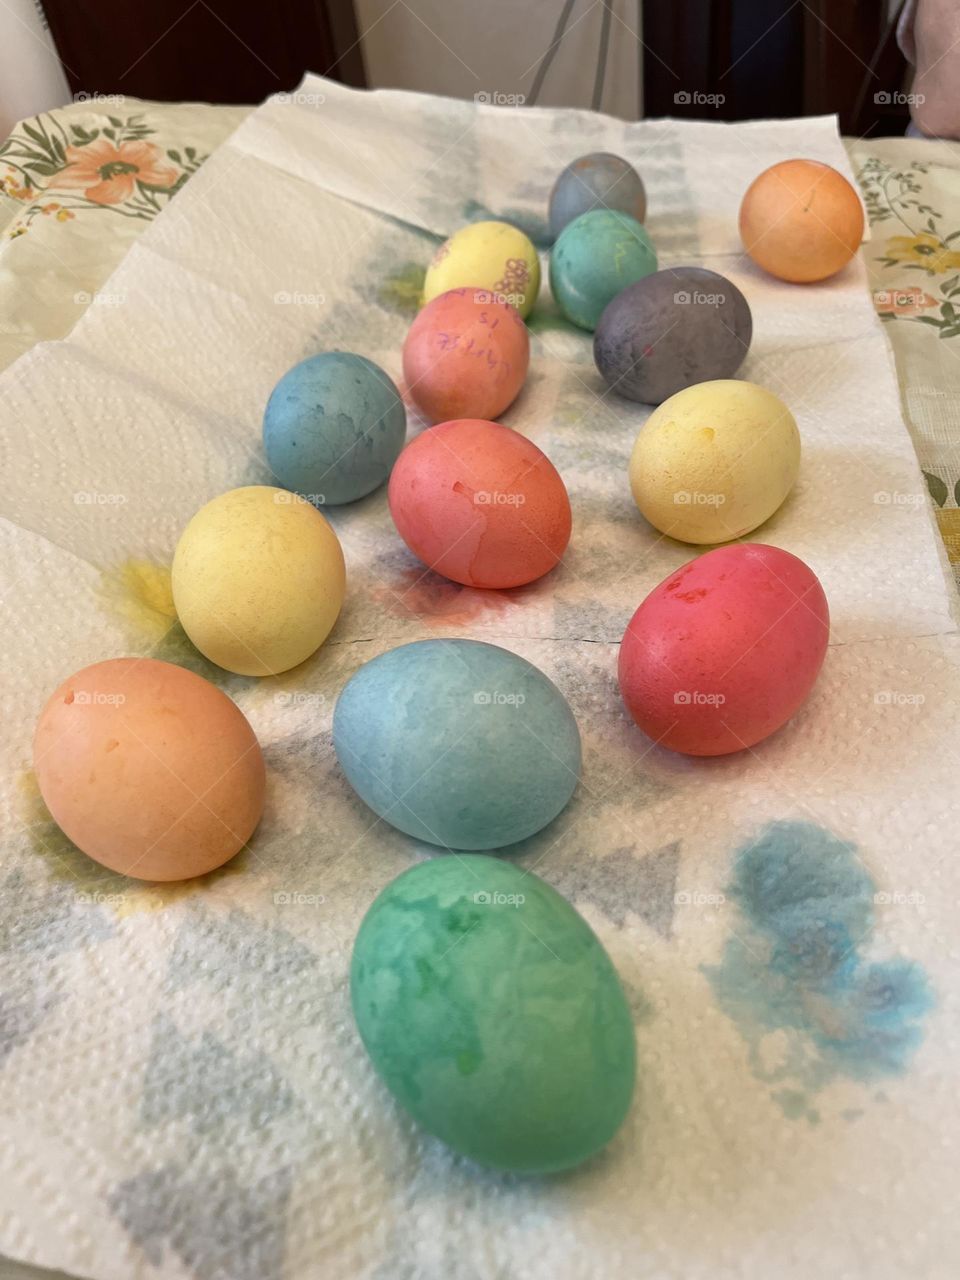 Dying eggs